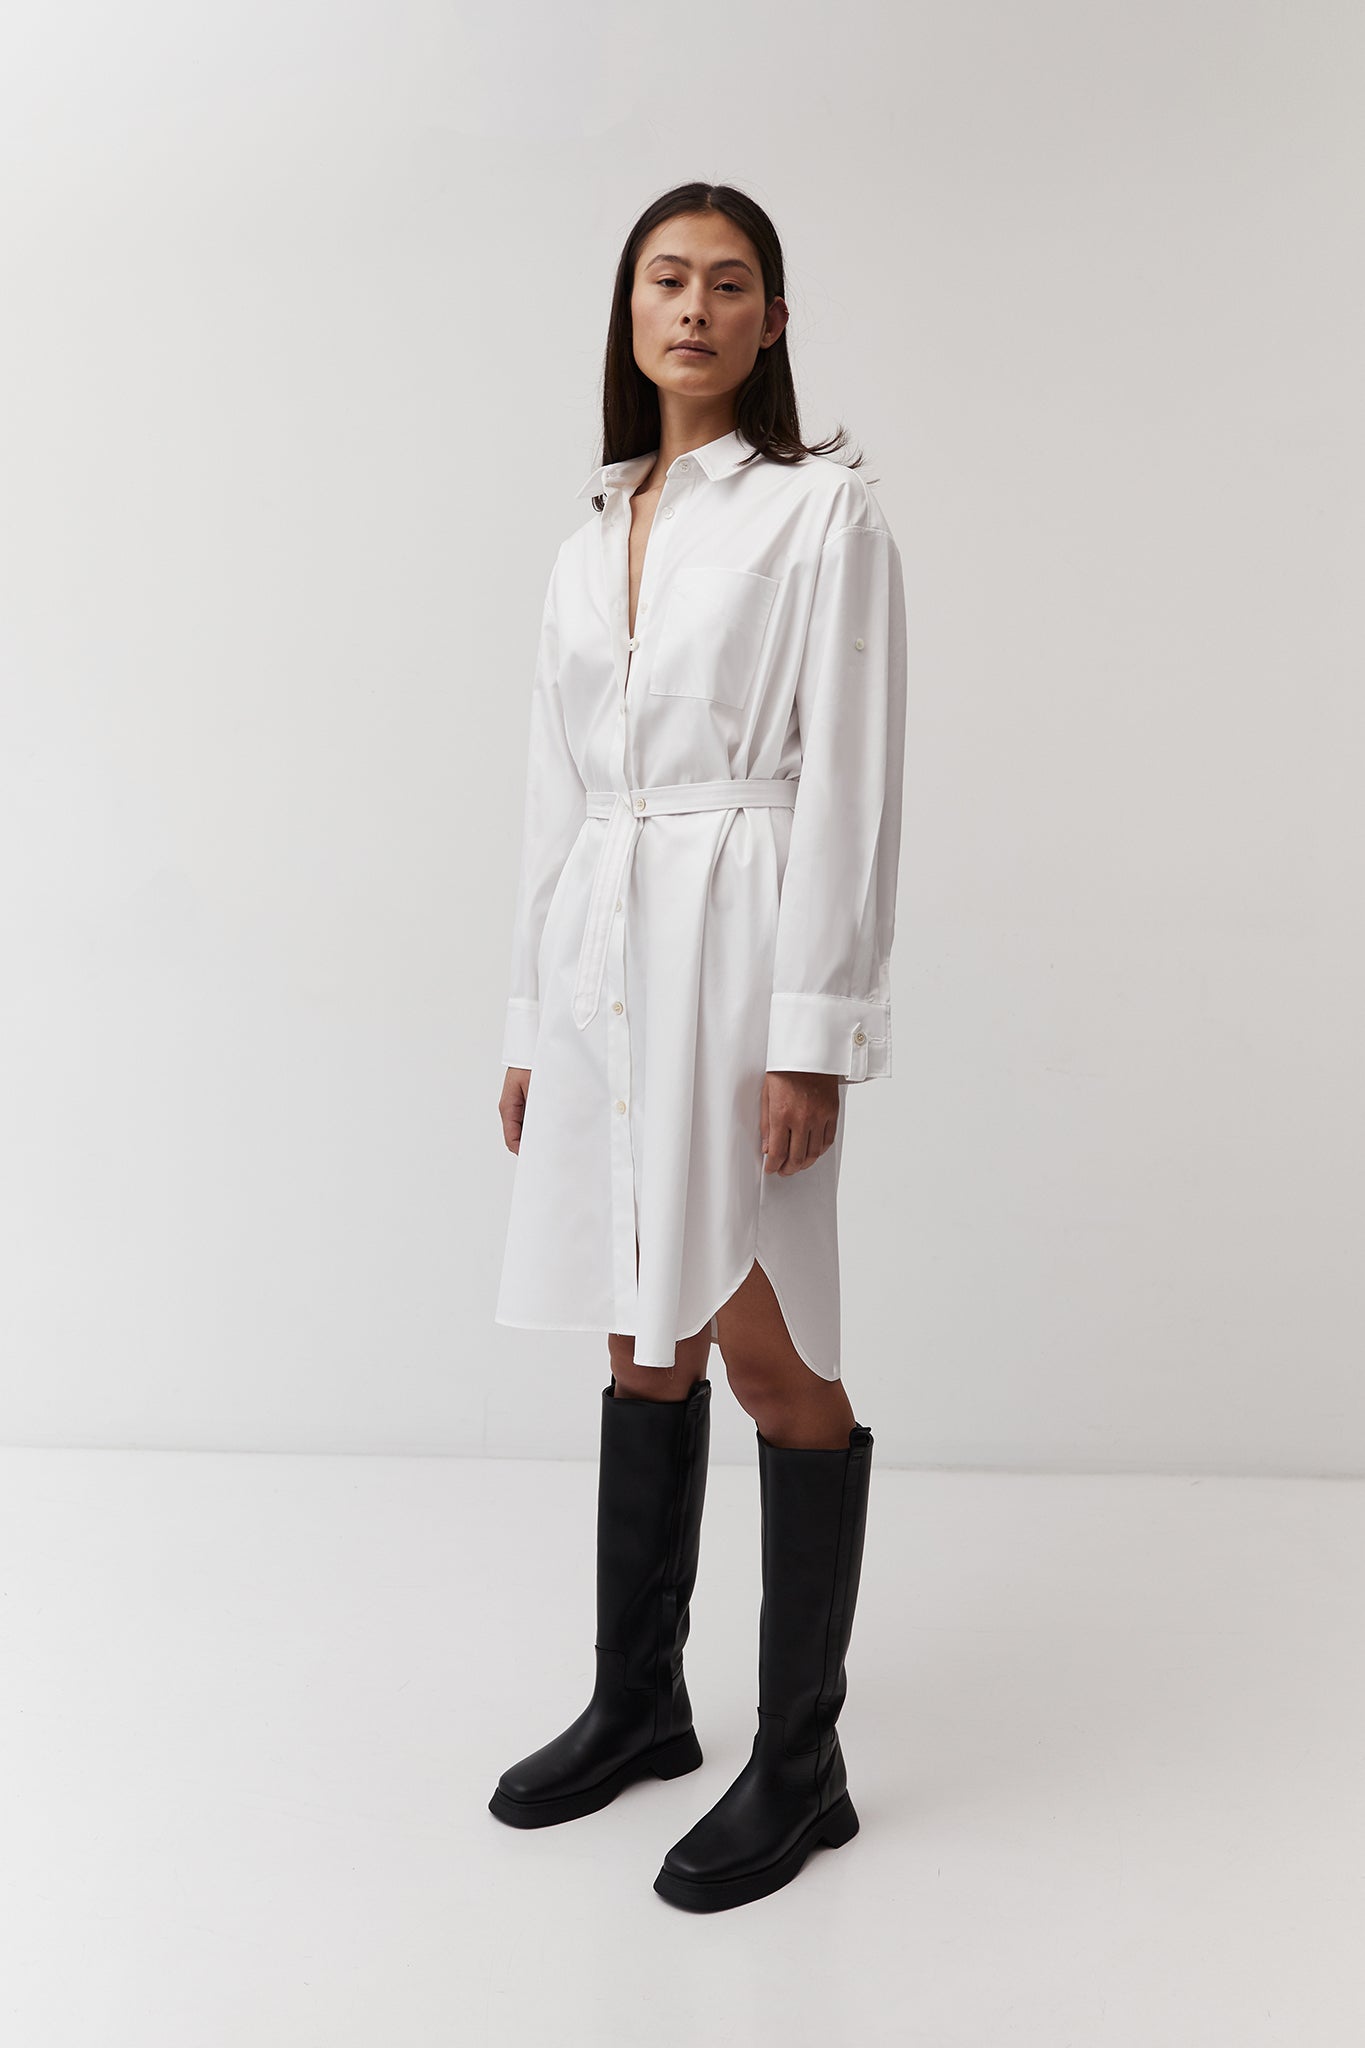 The Array womenswear fashion label london fashion brand workwear womens fashion Womens White Shirt Dress in Quick Wrinkle Recovery Cotton 